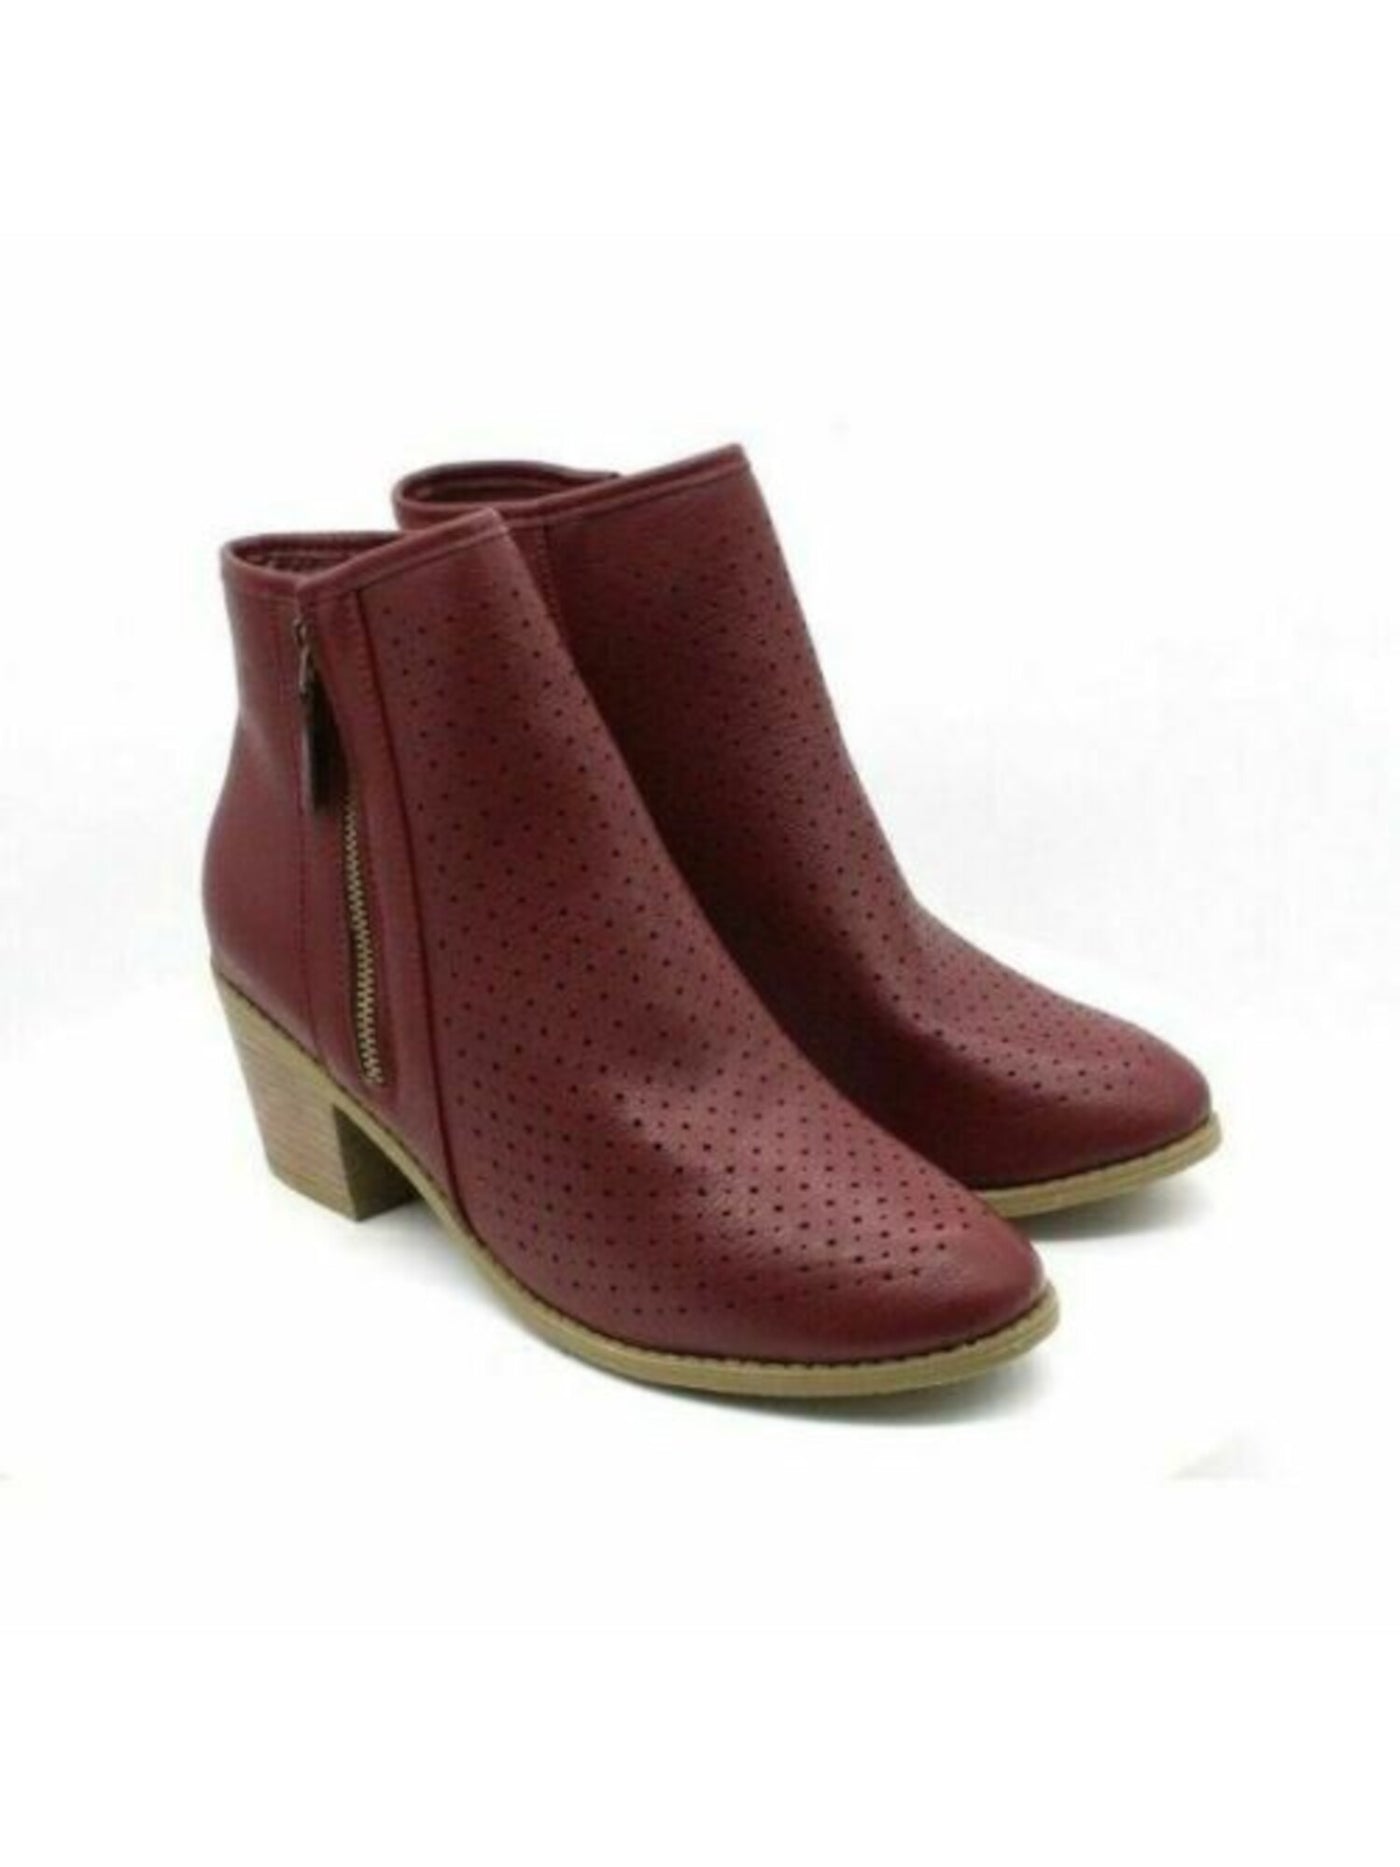 JOURNEE COLLECTION Womens Maroon Perforated Padded Meleny Round Toe Block Heel Zip-Up Booties 12 M